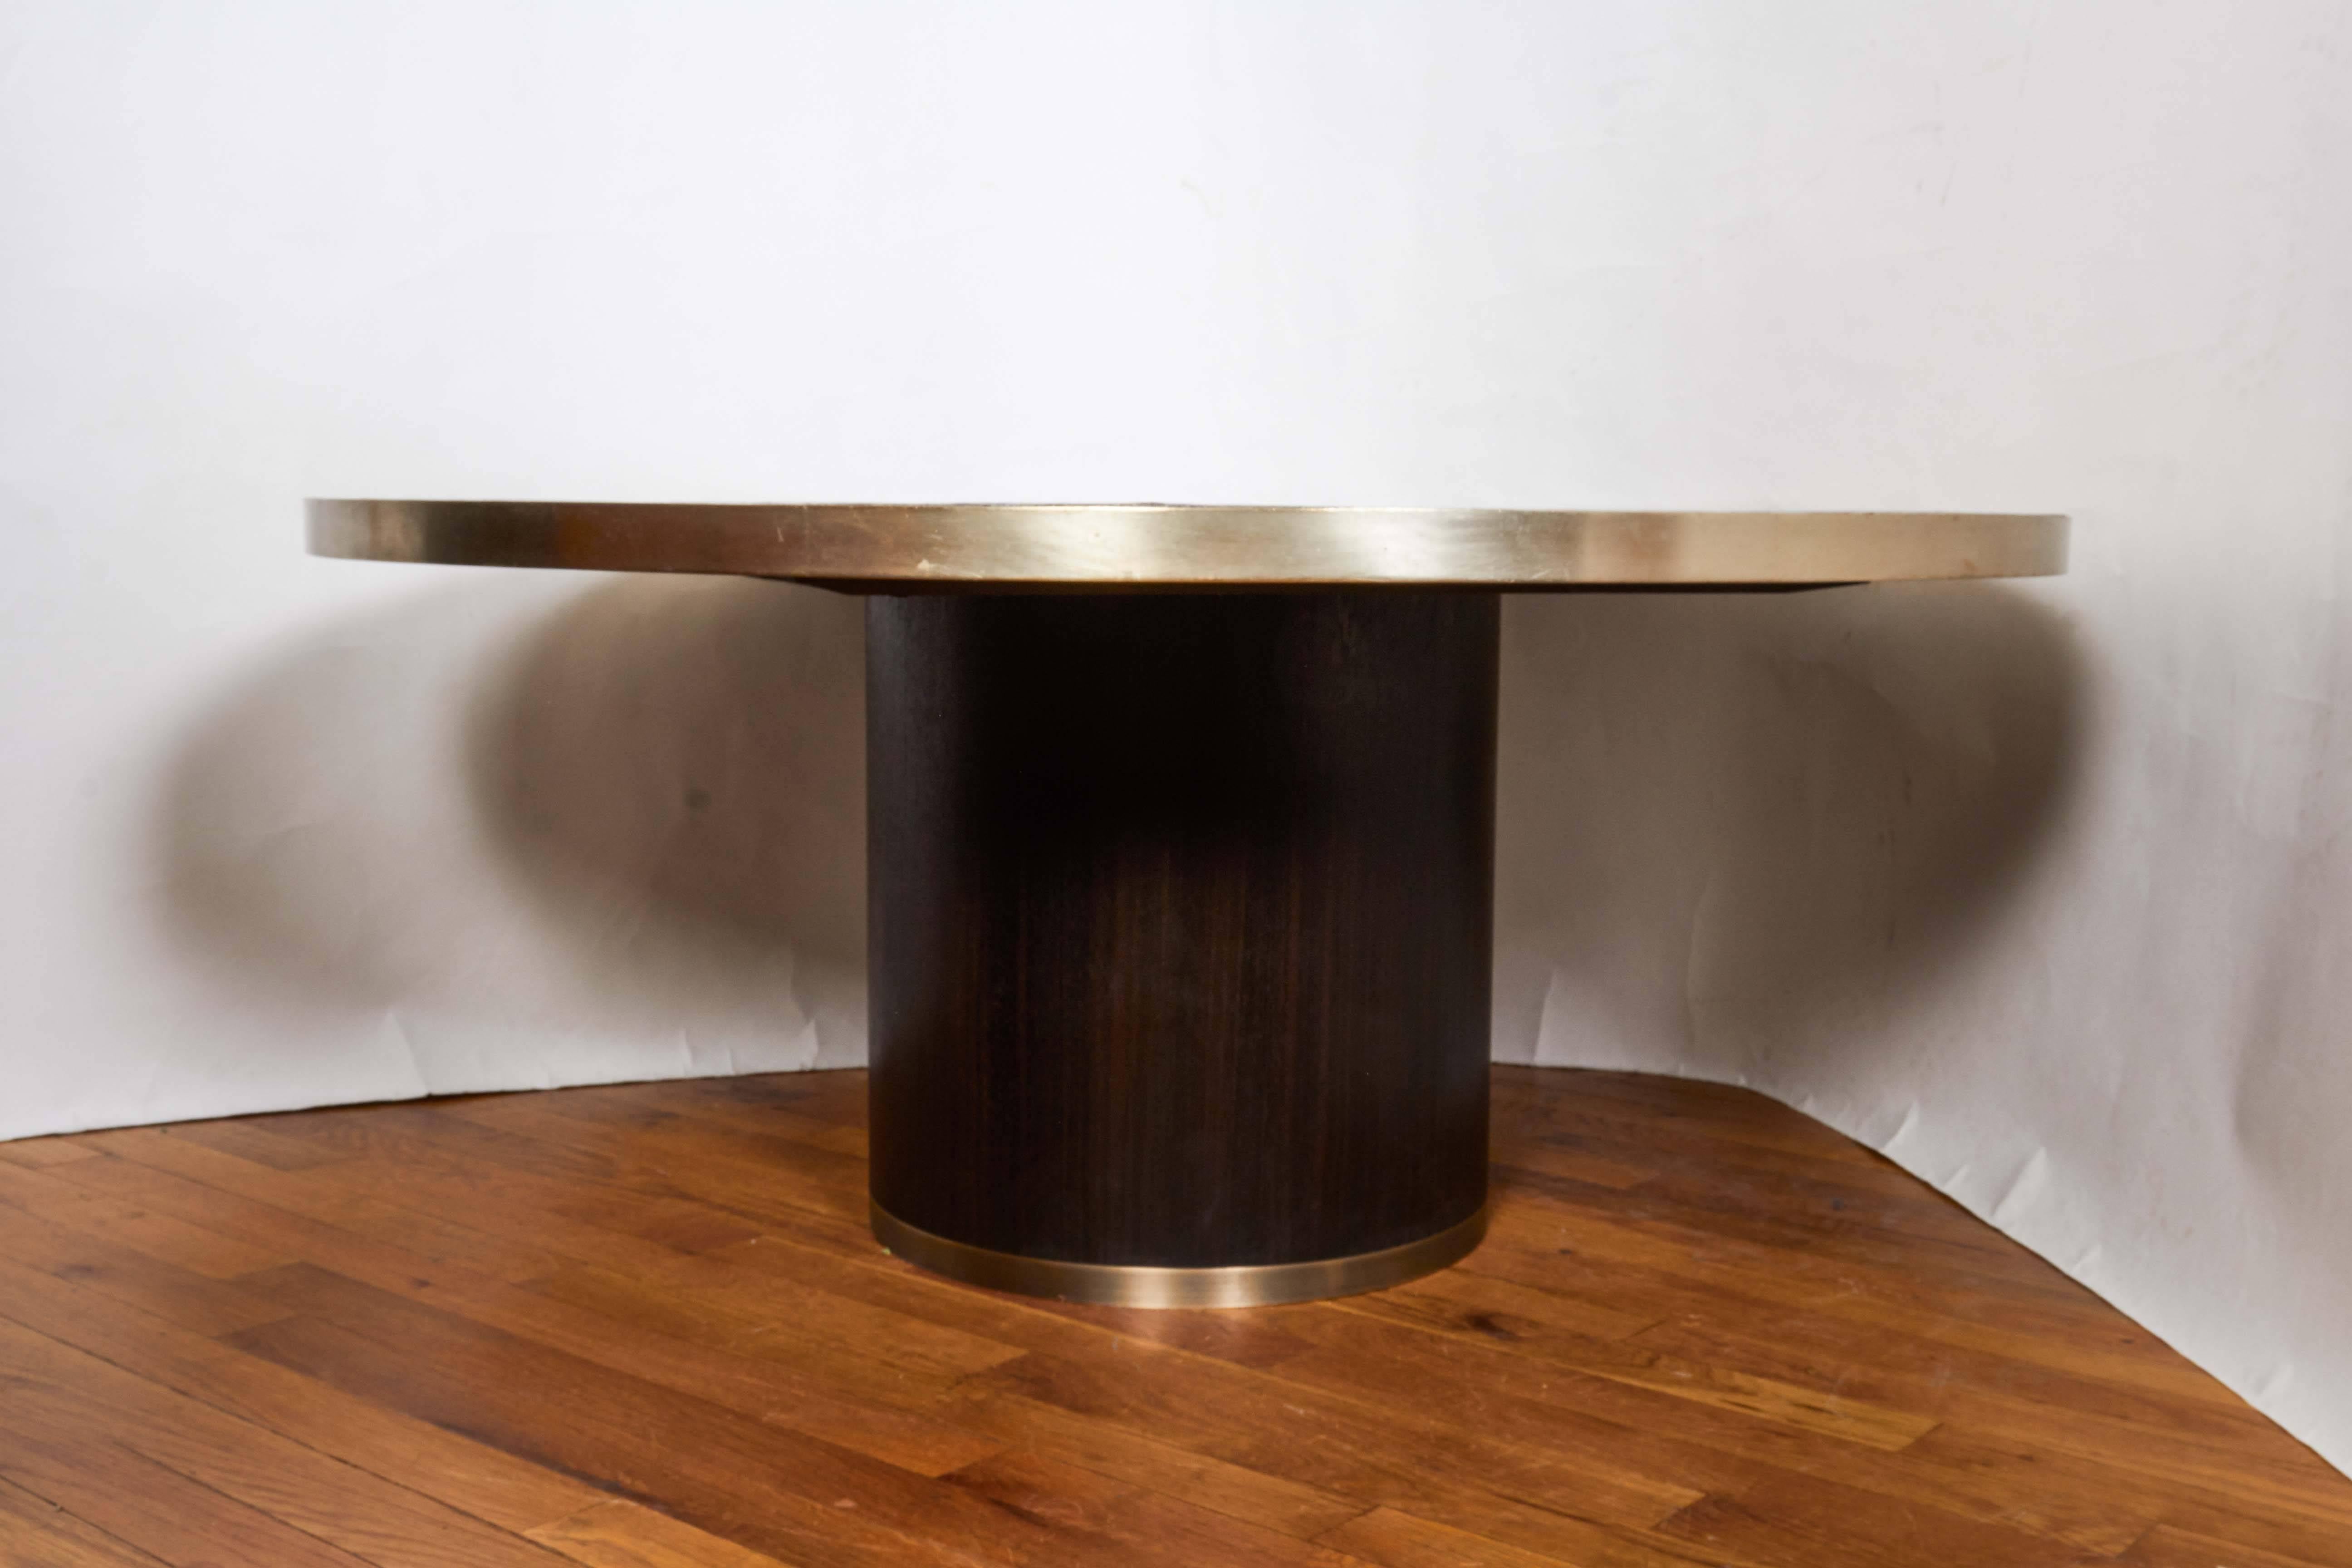 A Mid-Century Modern mosaic tile and bronze coffee table, black cylindrical base.